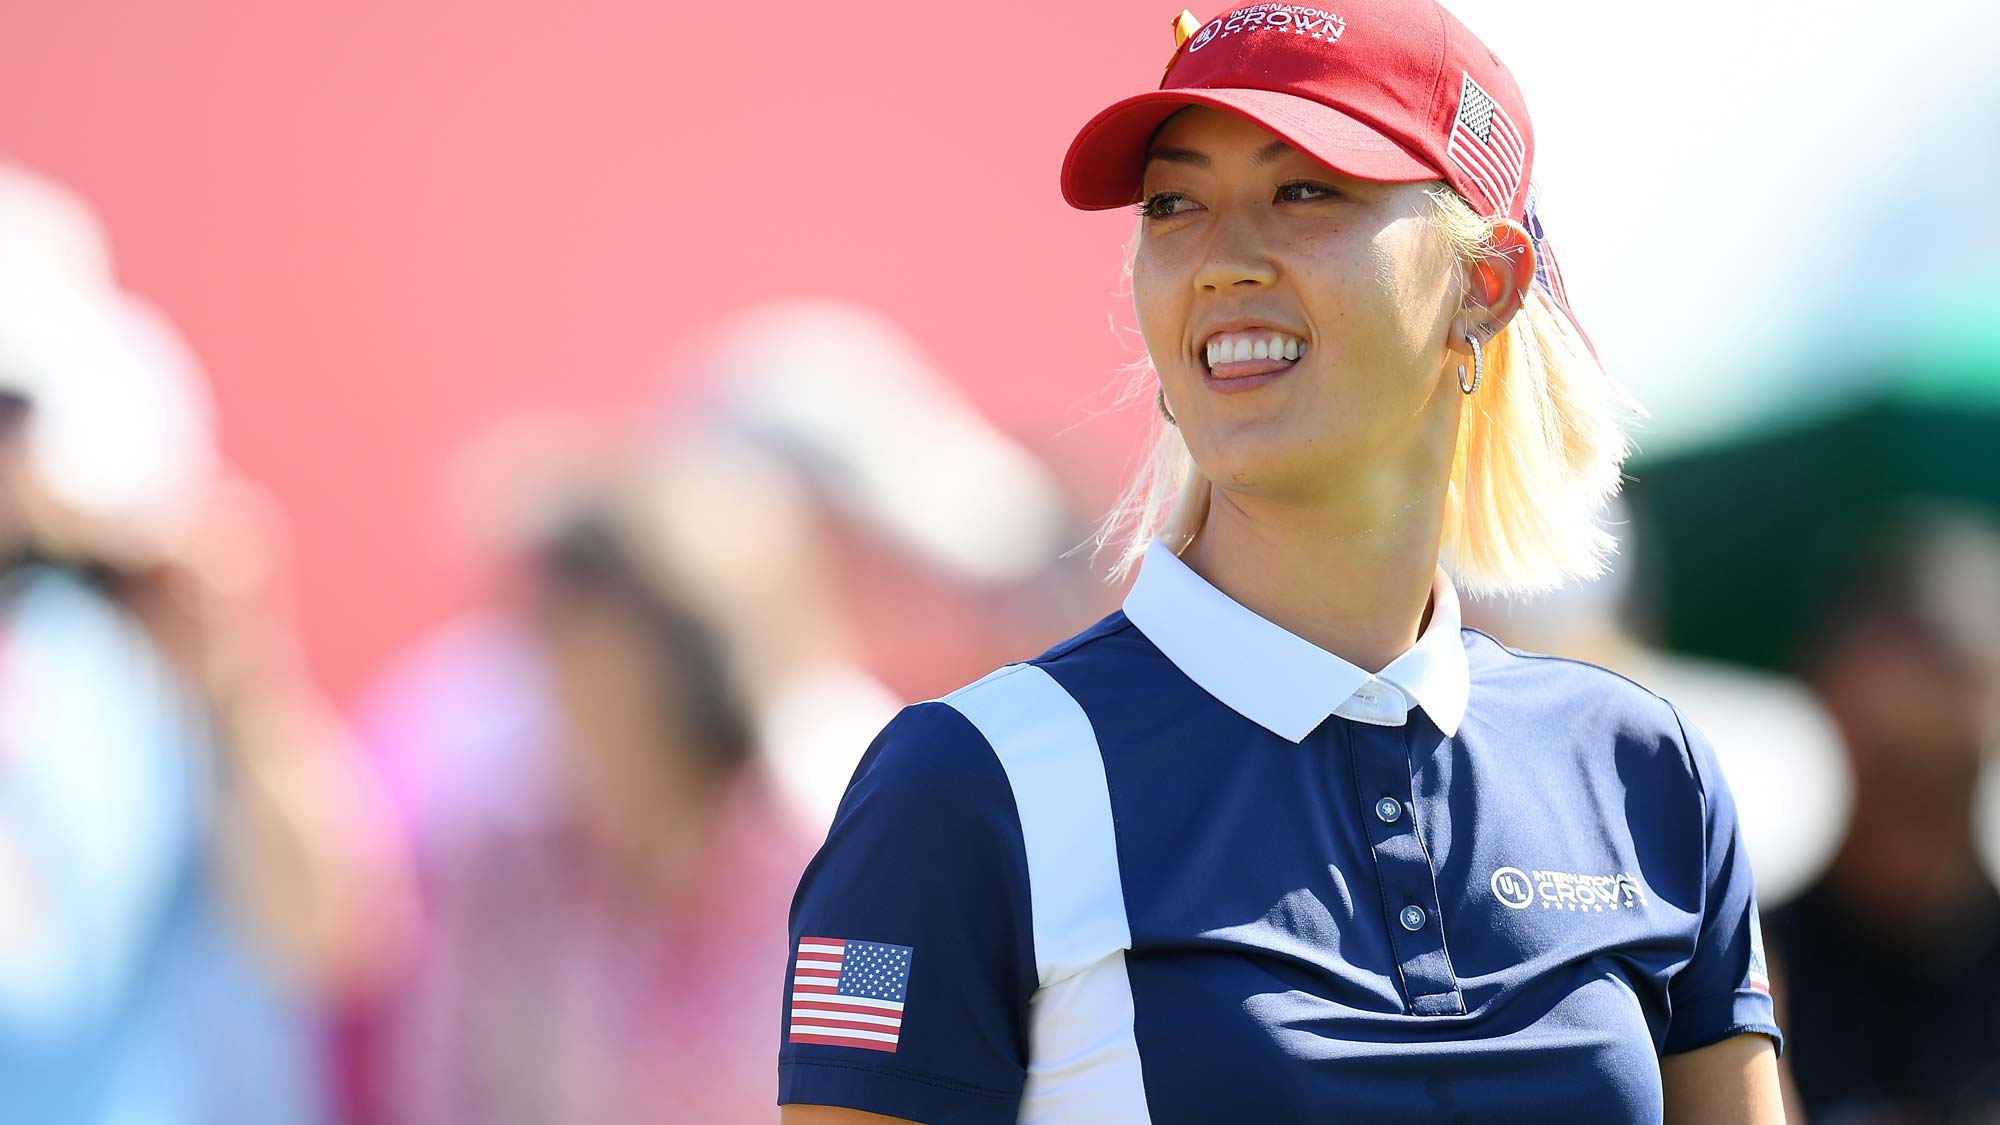 Michelle Wie of the United States is seen prior to the Pool B match between United States and Sweden on day one of the UL International Crown